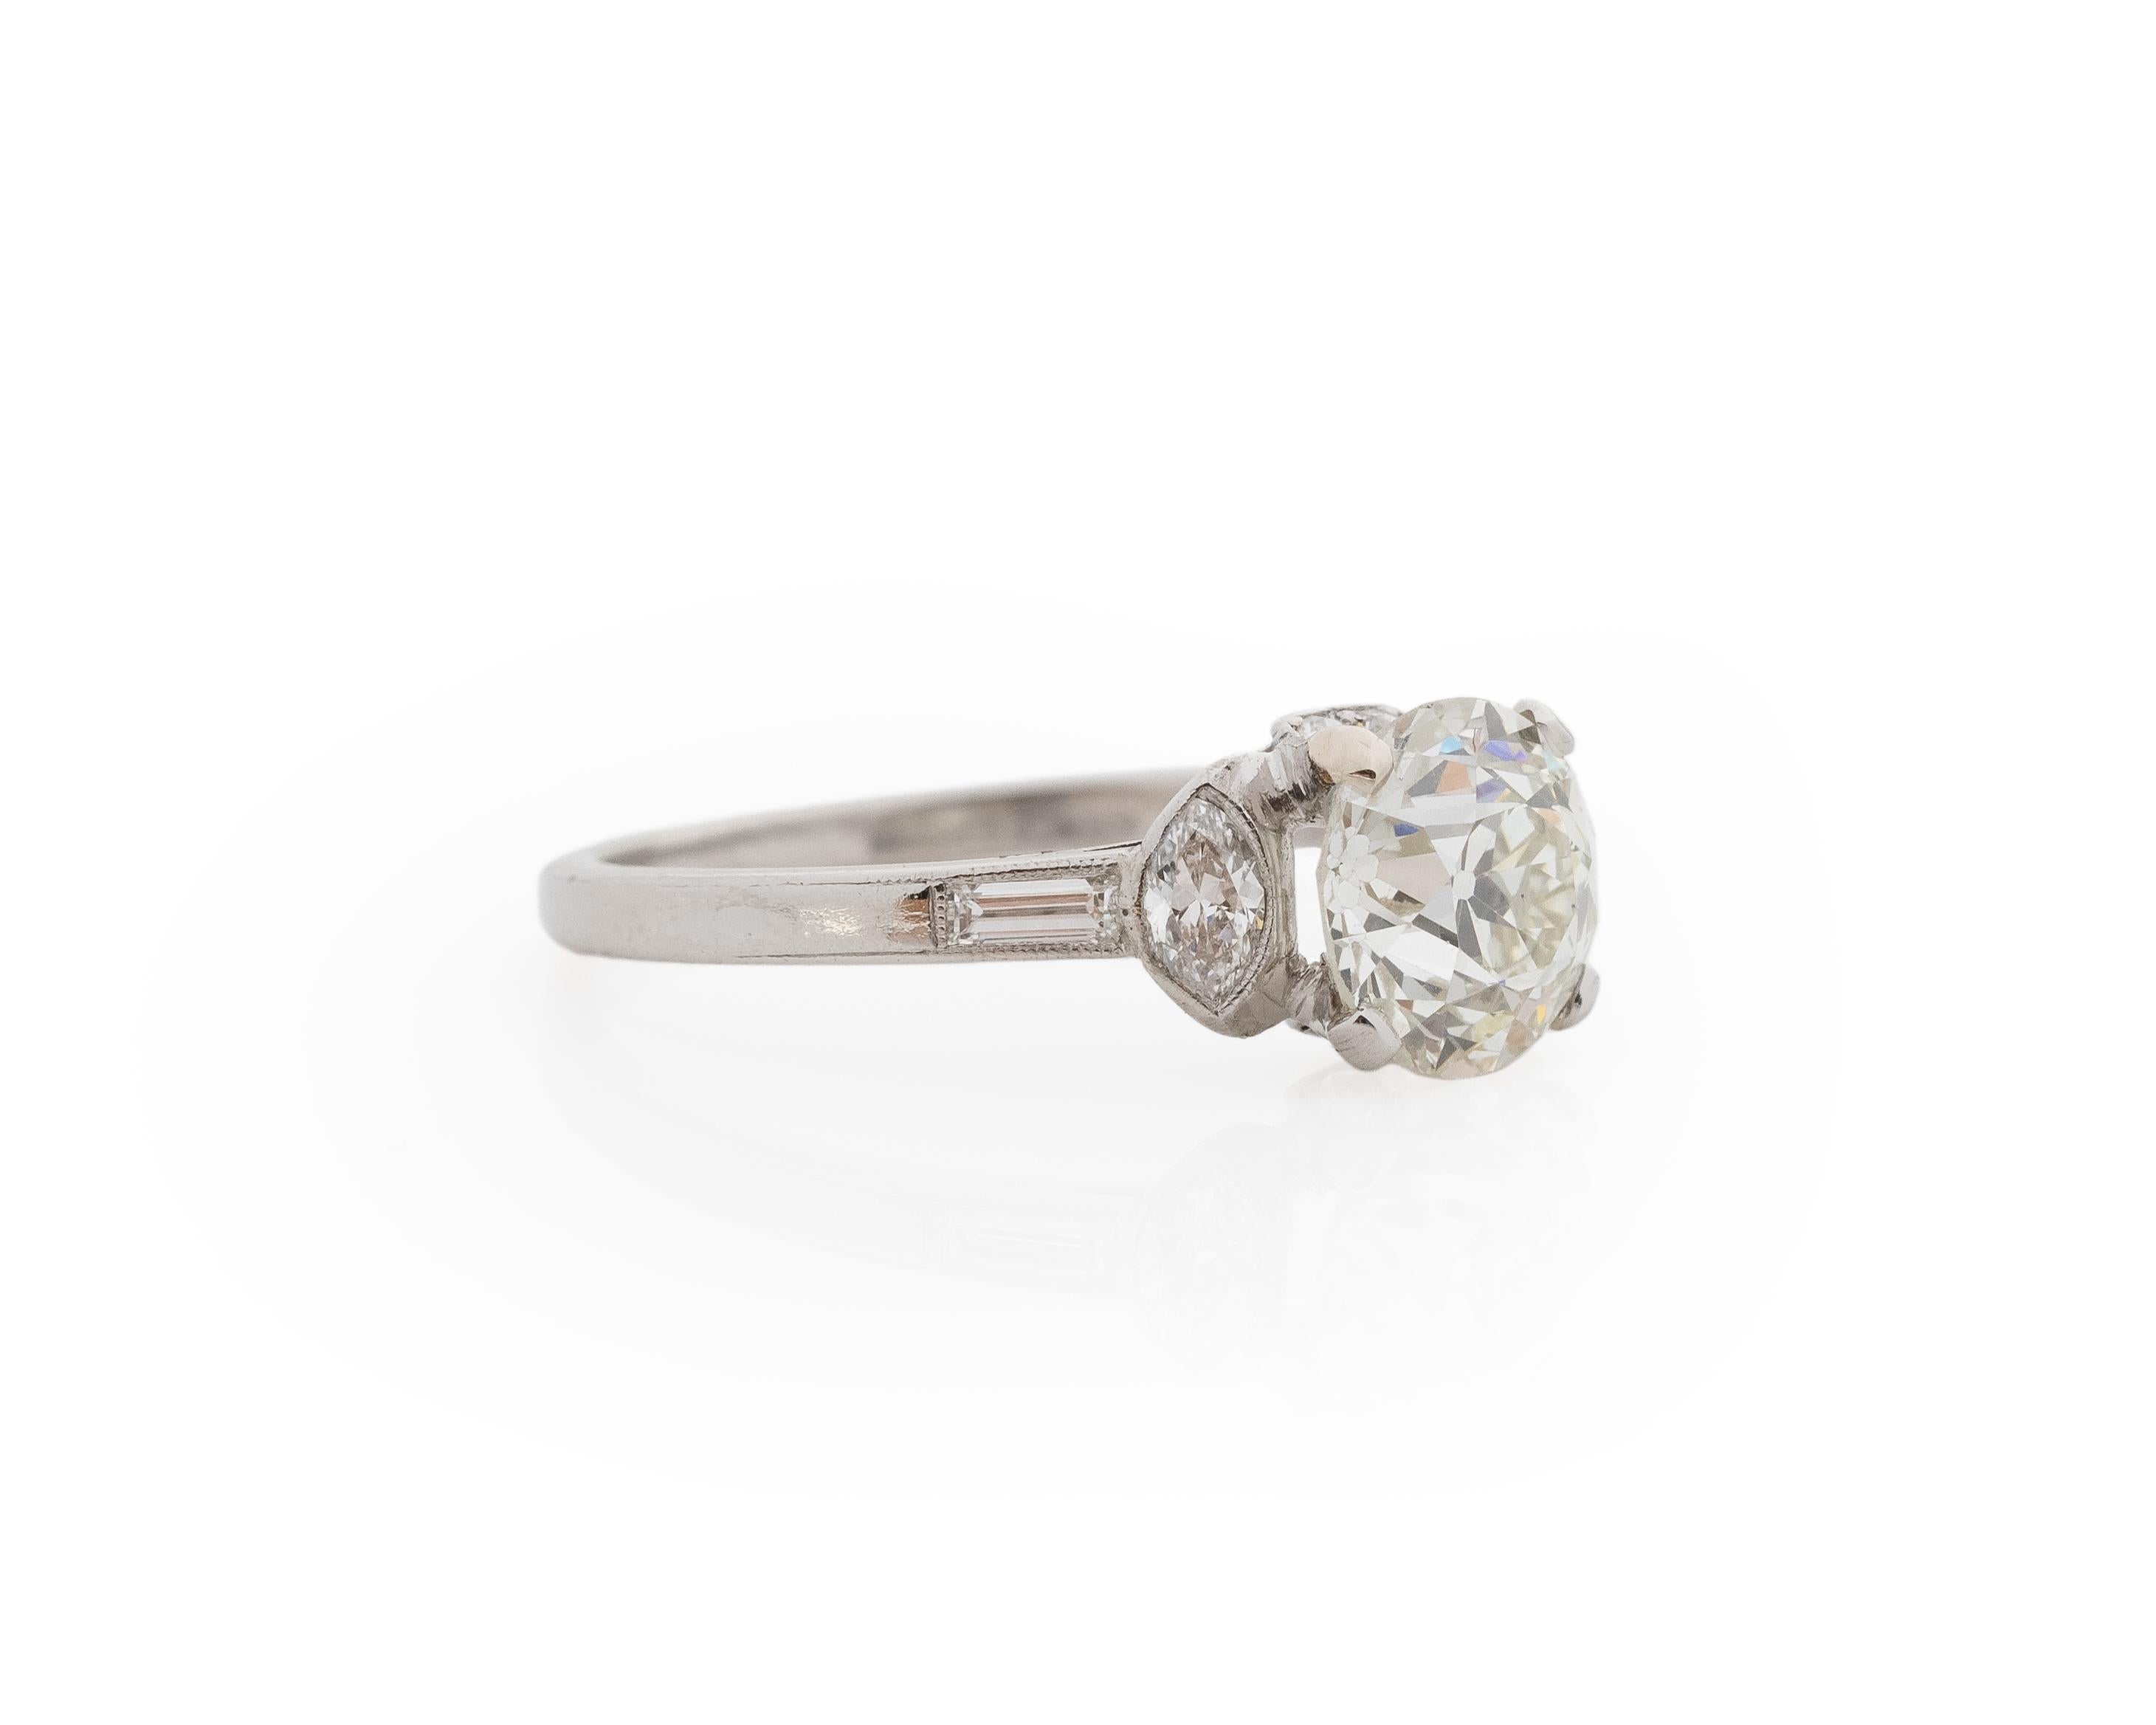 Year: 1930s

Item Details:
Ring Size: 7.25
Metal Type: Platinum [Hallmarked, and Tested]
Weight: 3.2 grams

Diamond Details:

GIA Report#:5231142674
Weight: 1.69ct total weight
Cut: Old European brilliant
Color: K
Clarity: VS2
Measurement: 7.55 x